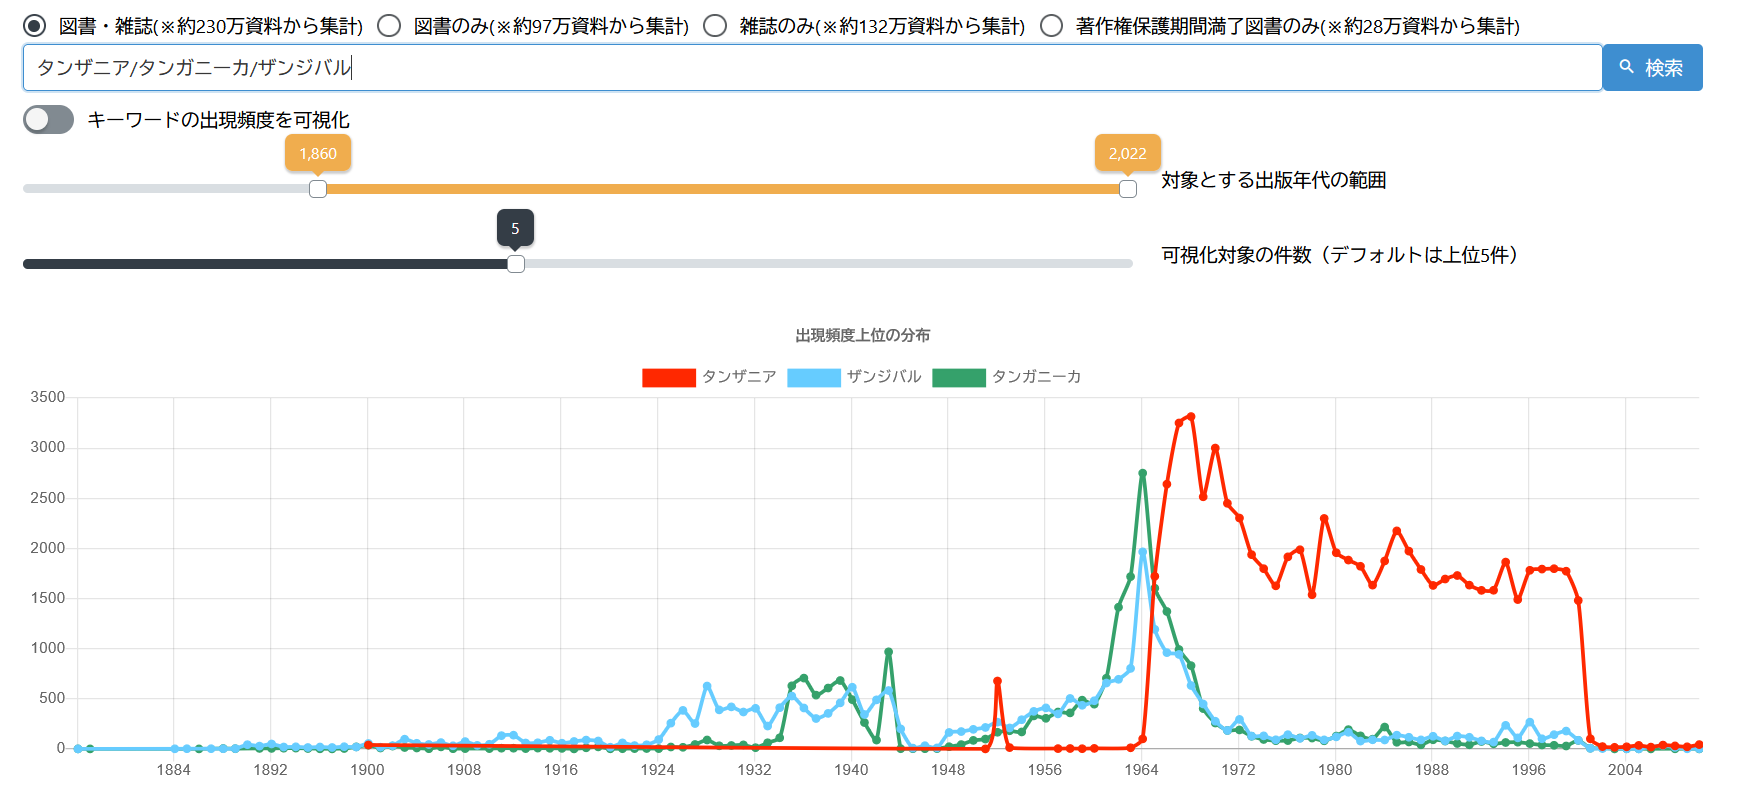 This graph from the NDL Ngram Viewer shows occurrences of the transliterations “タンザニア” and “タンガニーカ” as well as “ザンジバル”. The graph shows the usage of all three words spiked in the mid-1960s, followed by the sustained use of “タンザニア” even as “タンガニーカ” and “ザンジバル” fell into disuse.